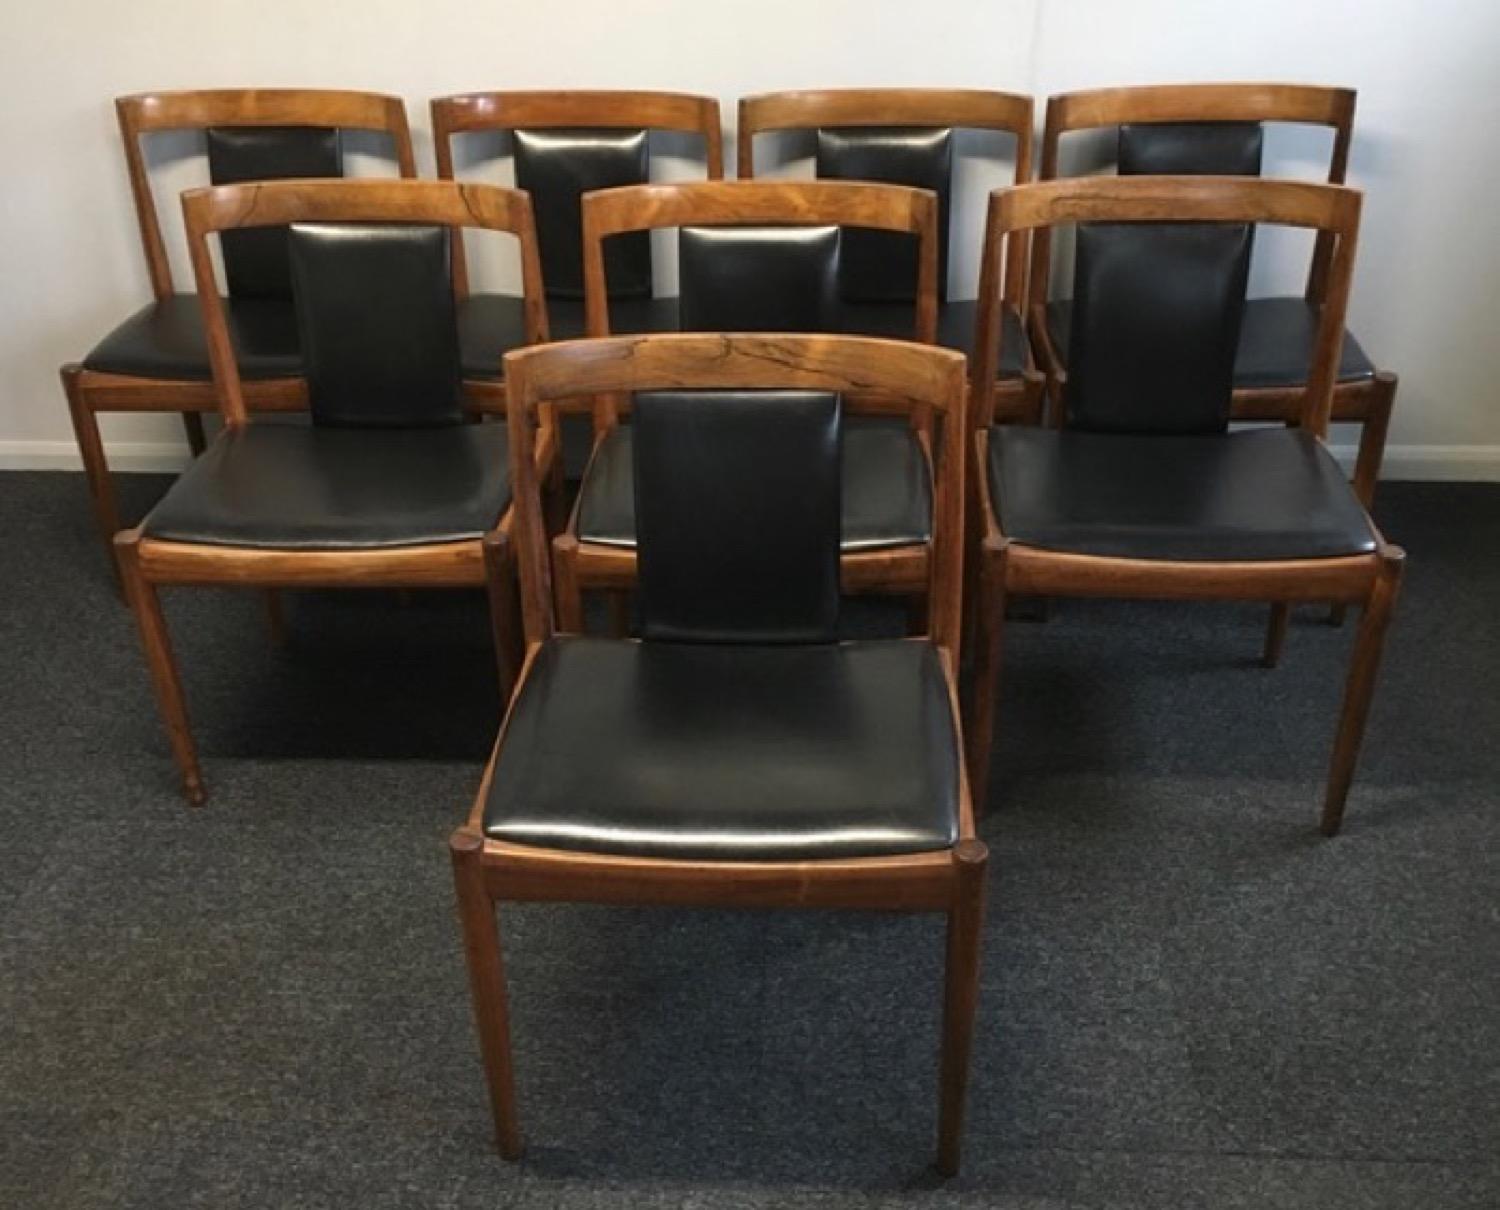 A rare set of 8 Danish leather and rosewood dining chairs designed by Architect Kai Kristiansen in the 1960s.  The chairs are from the 'Univers' series from 1965.  A beautiful and classic design and said to be the best design from the many years he